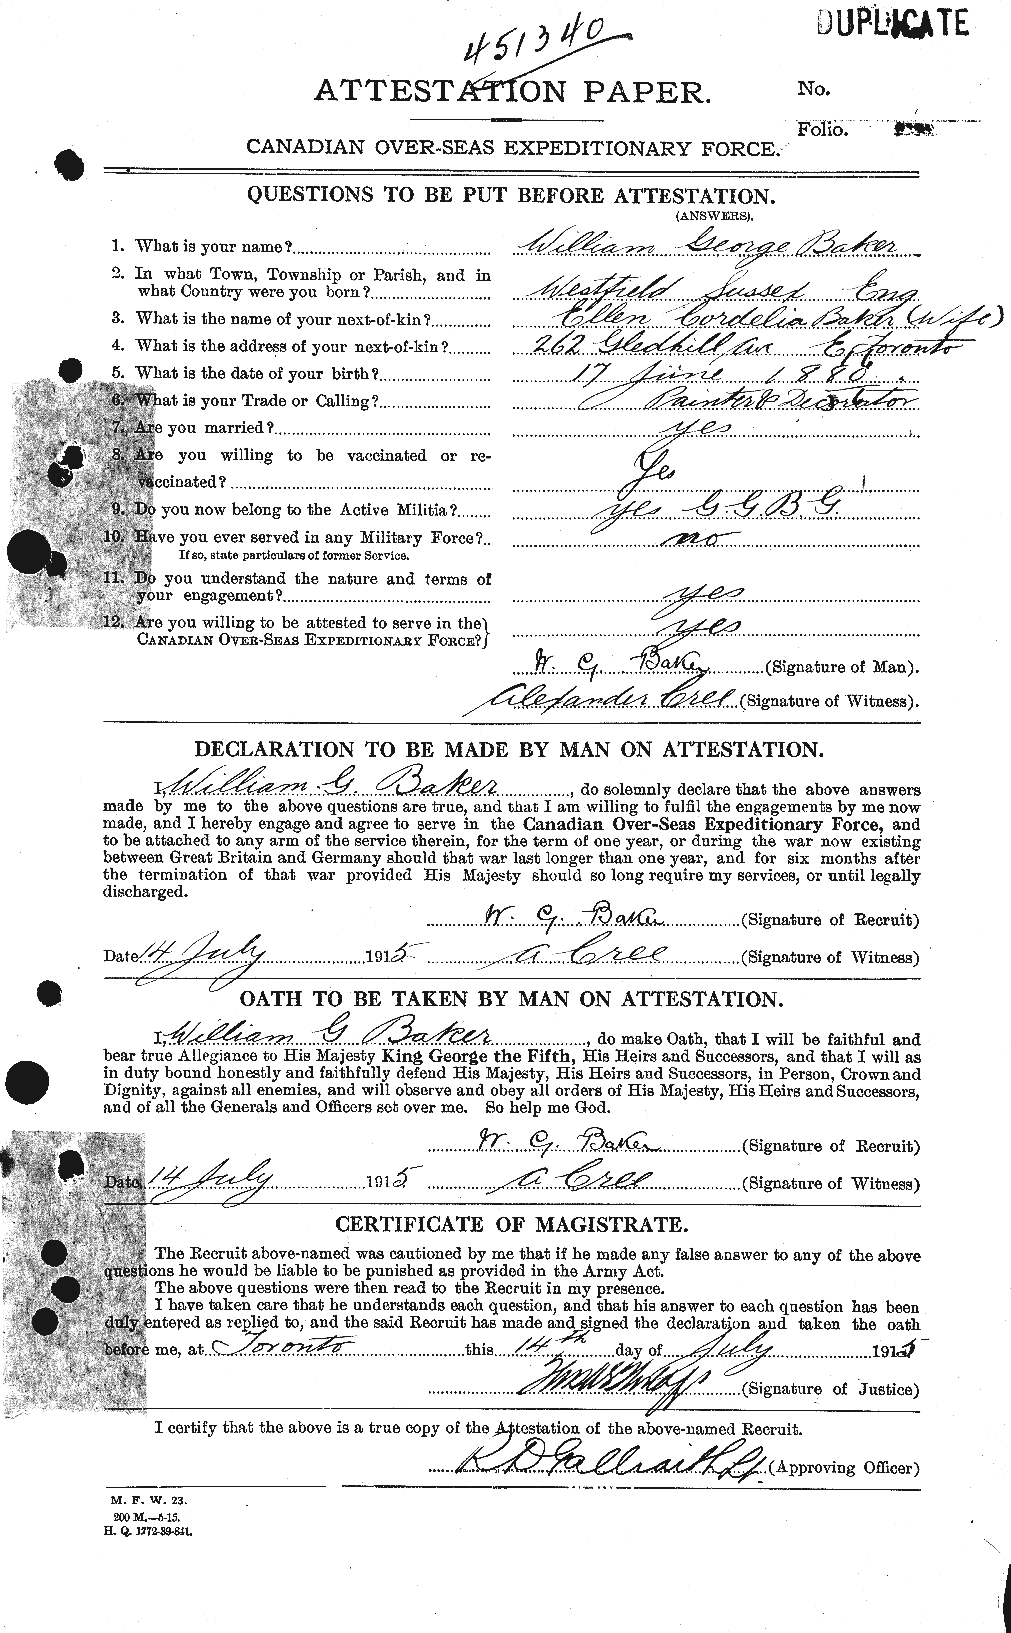 Personnel Records of the First World War - CEF 216524a